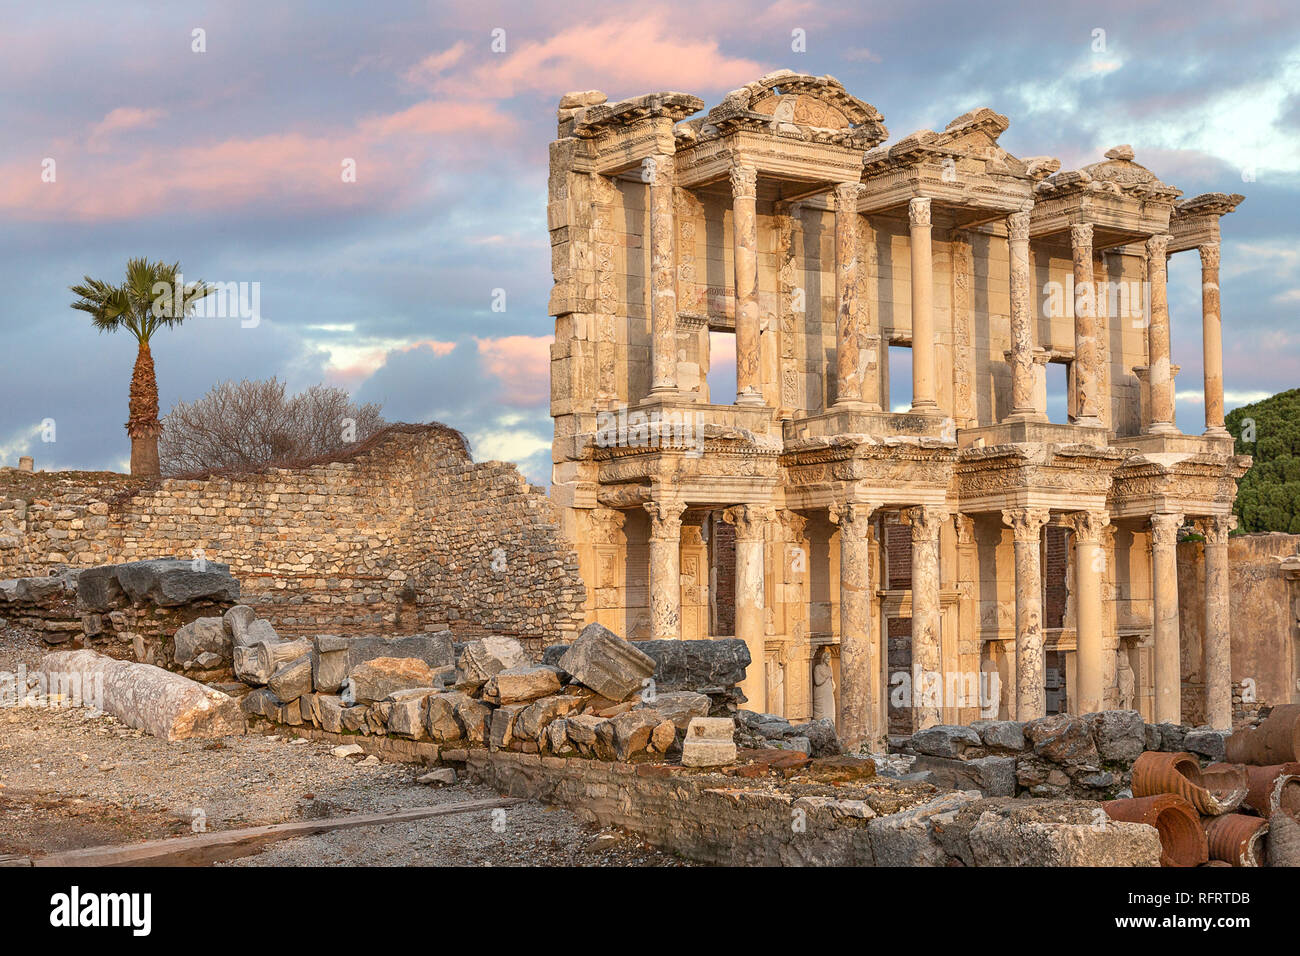 Celsus library in the Roman ruins of Ephesus in Turkey Stock Photo